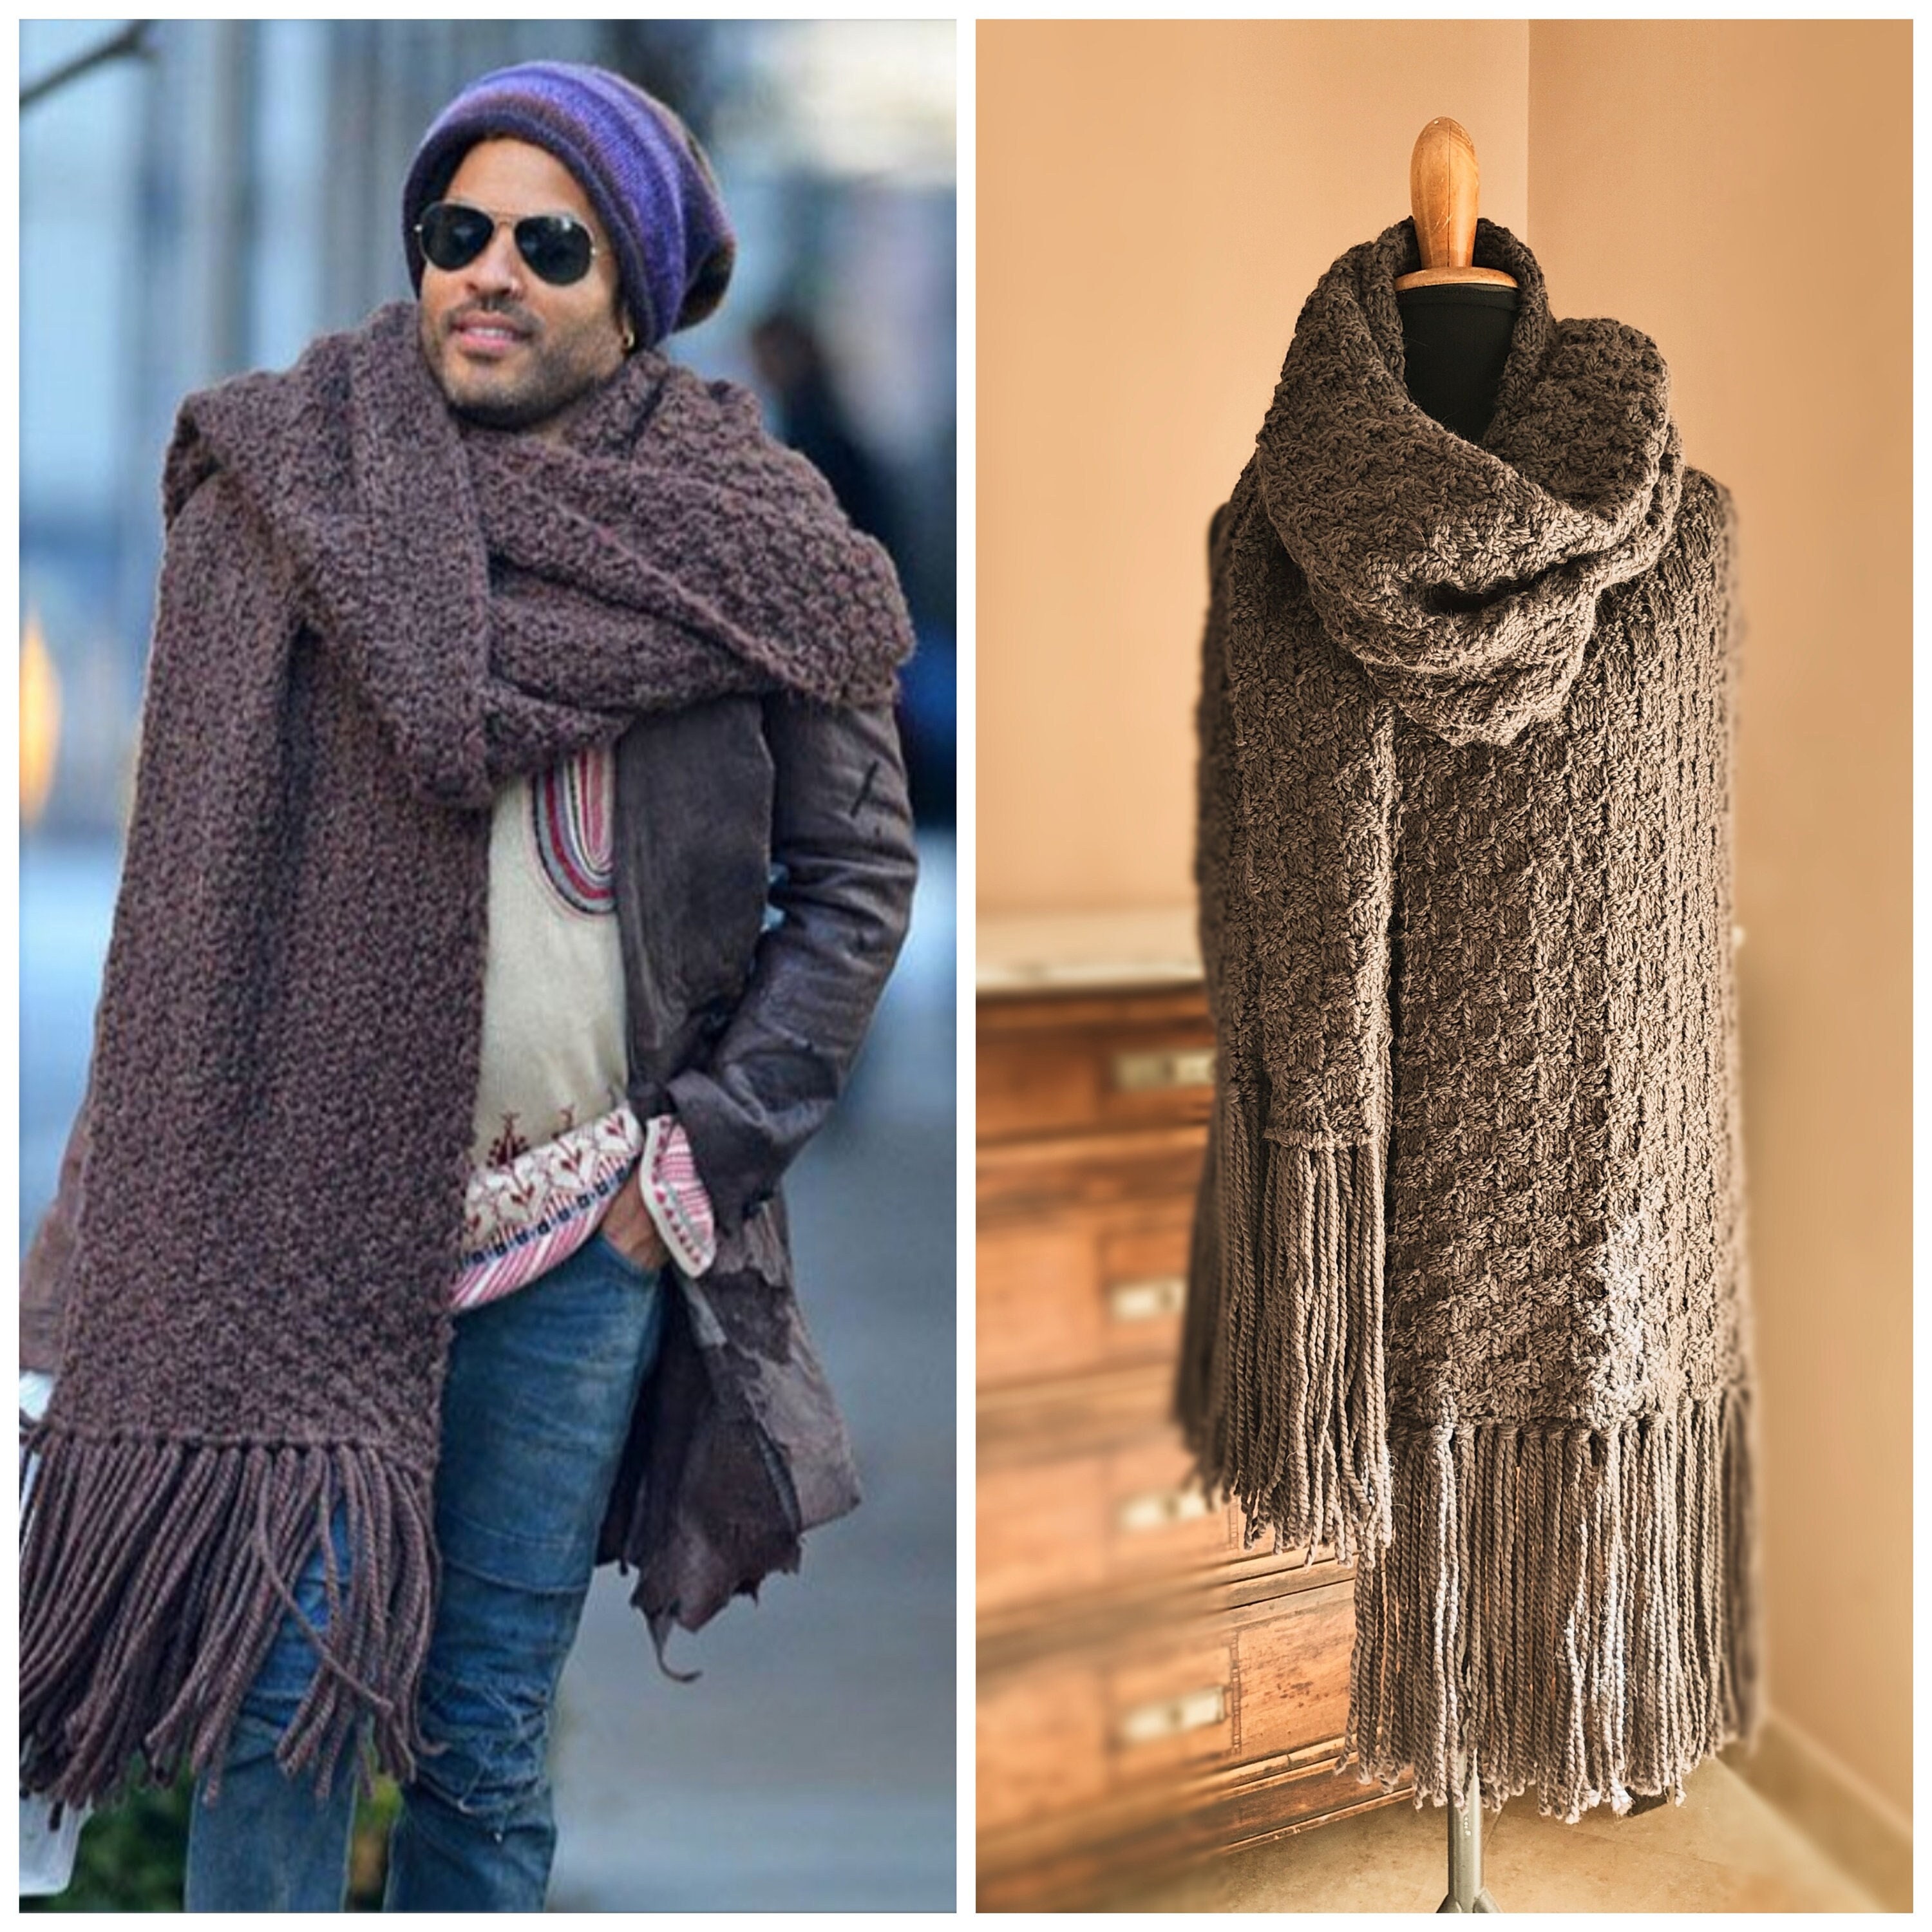 Huge Shawl 9.5 Ft X 24 Inches, Inspired Lenny Kravitz Giant Scarf